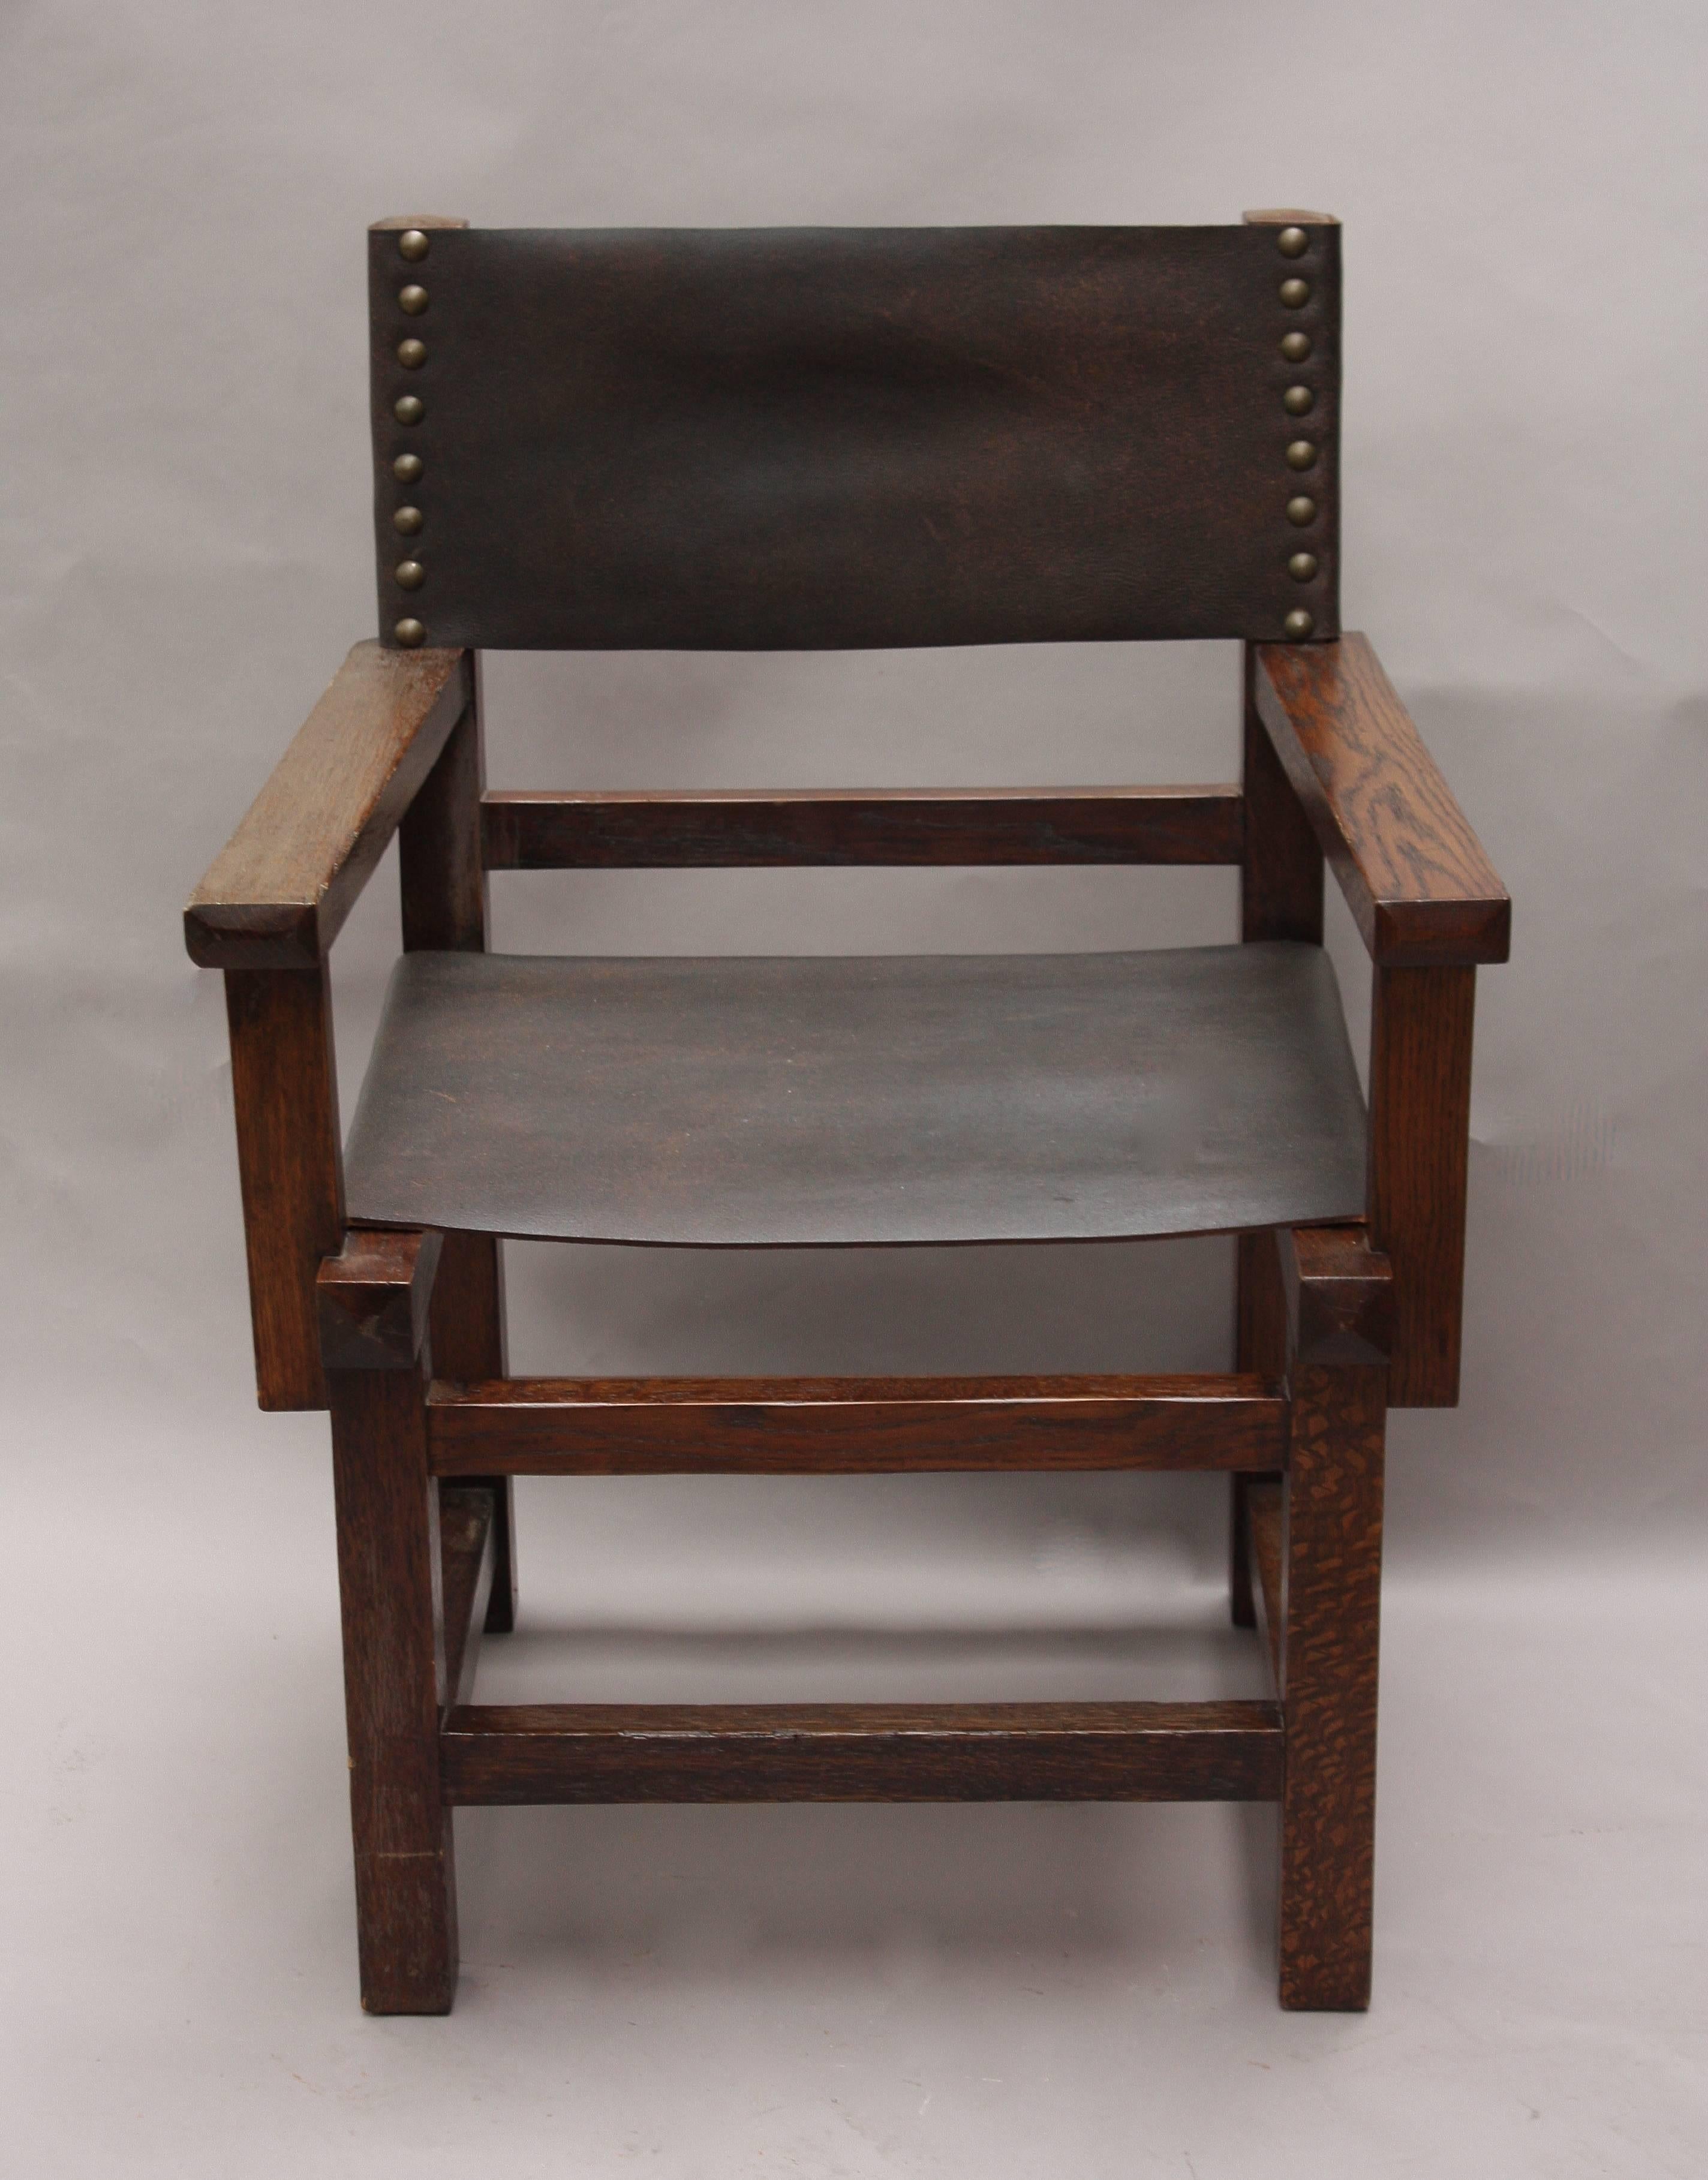 1910 Oak Armchair with Riveted Leather Upholstery In Good Condition For Sale In Pasadena, CA